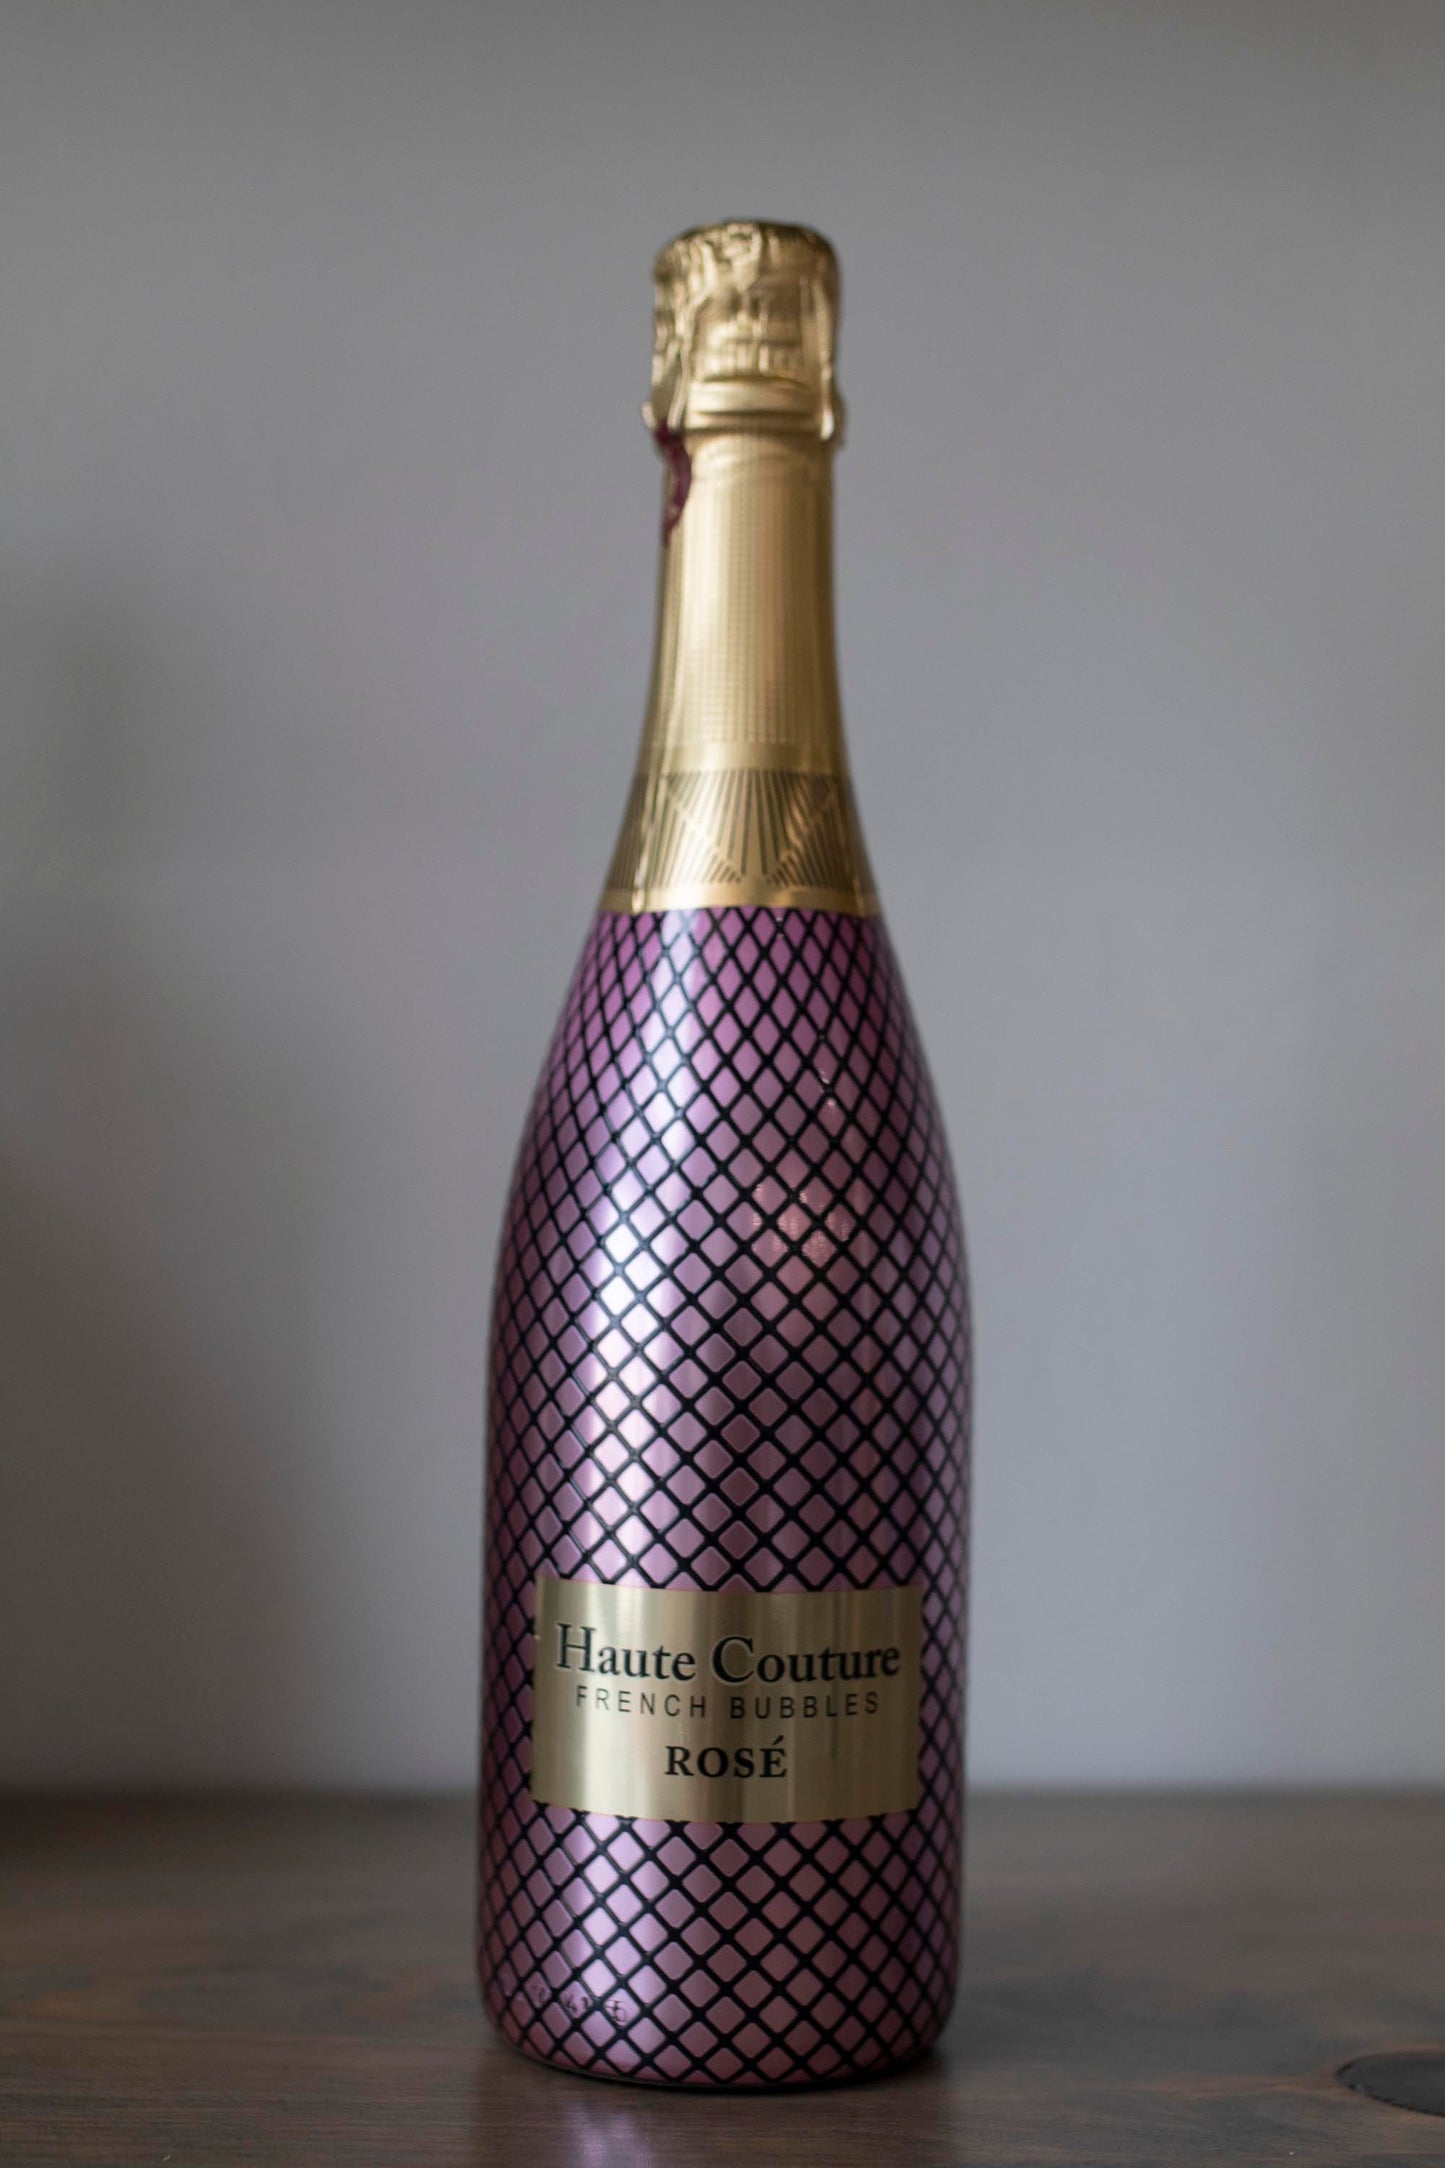 Bottle of Haute couture rose found at Vine & Board in 3809 NW 166th St Suite 1, Edmond, OK 73012